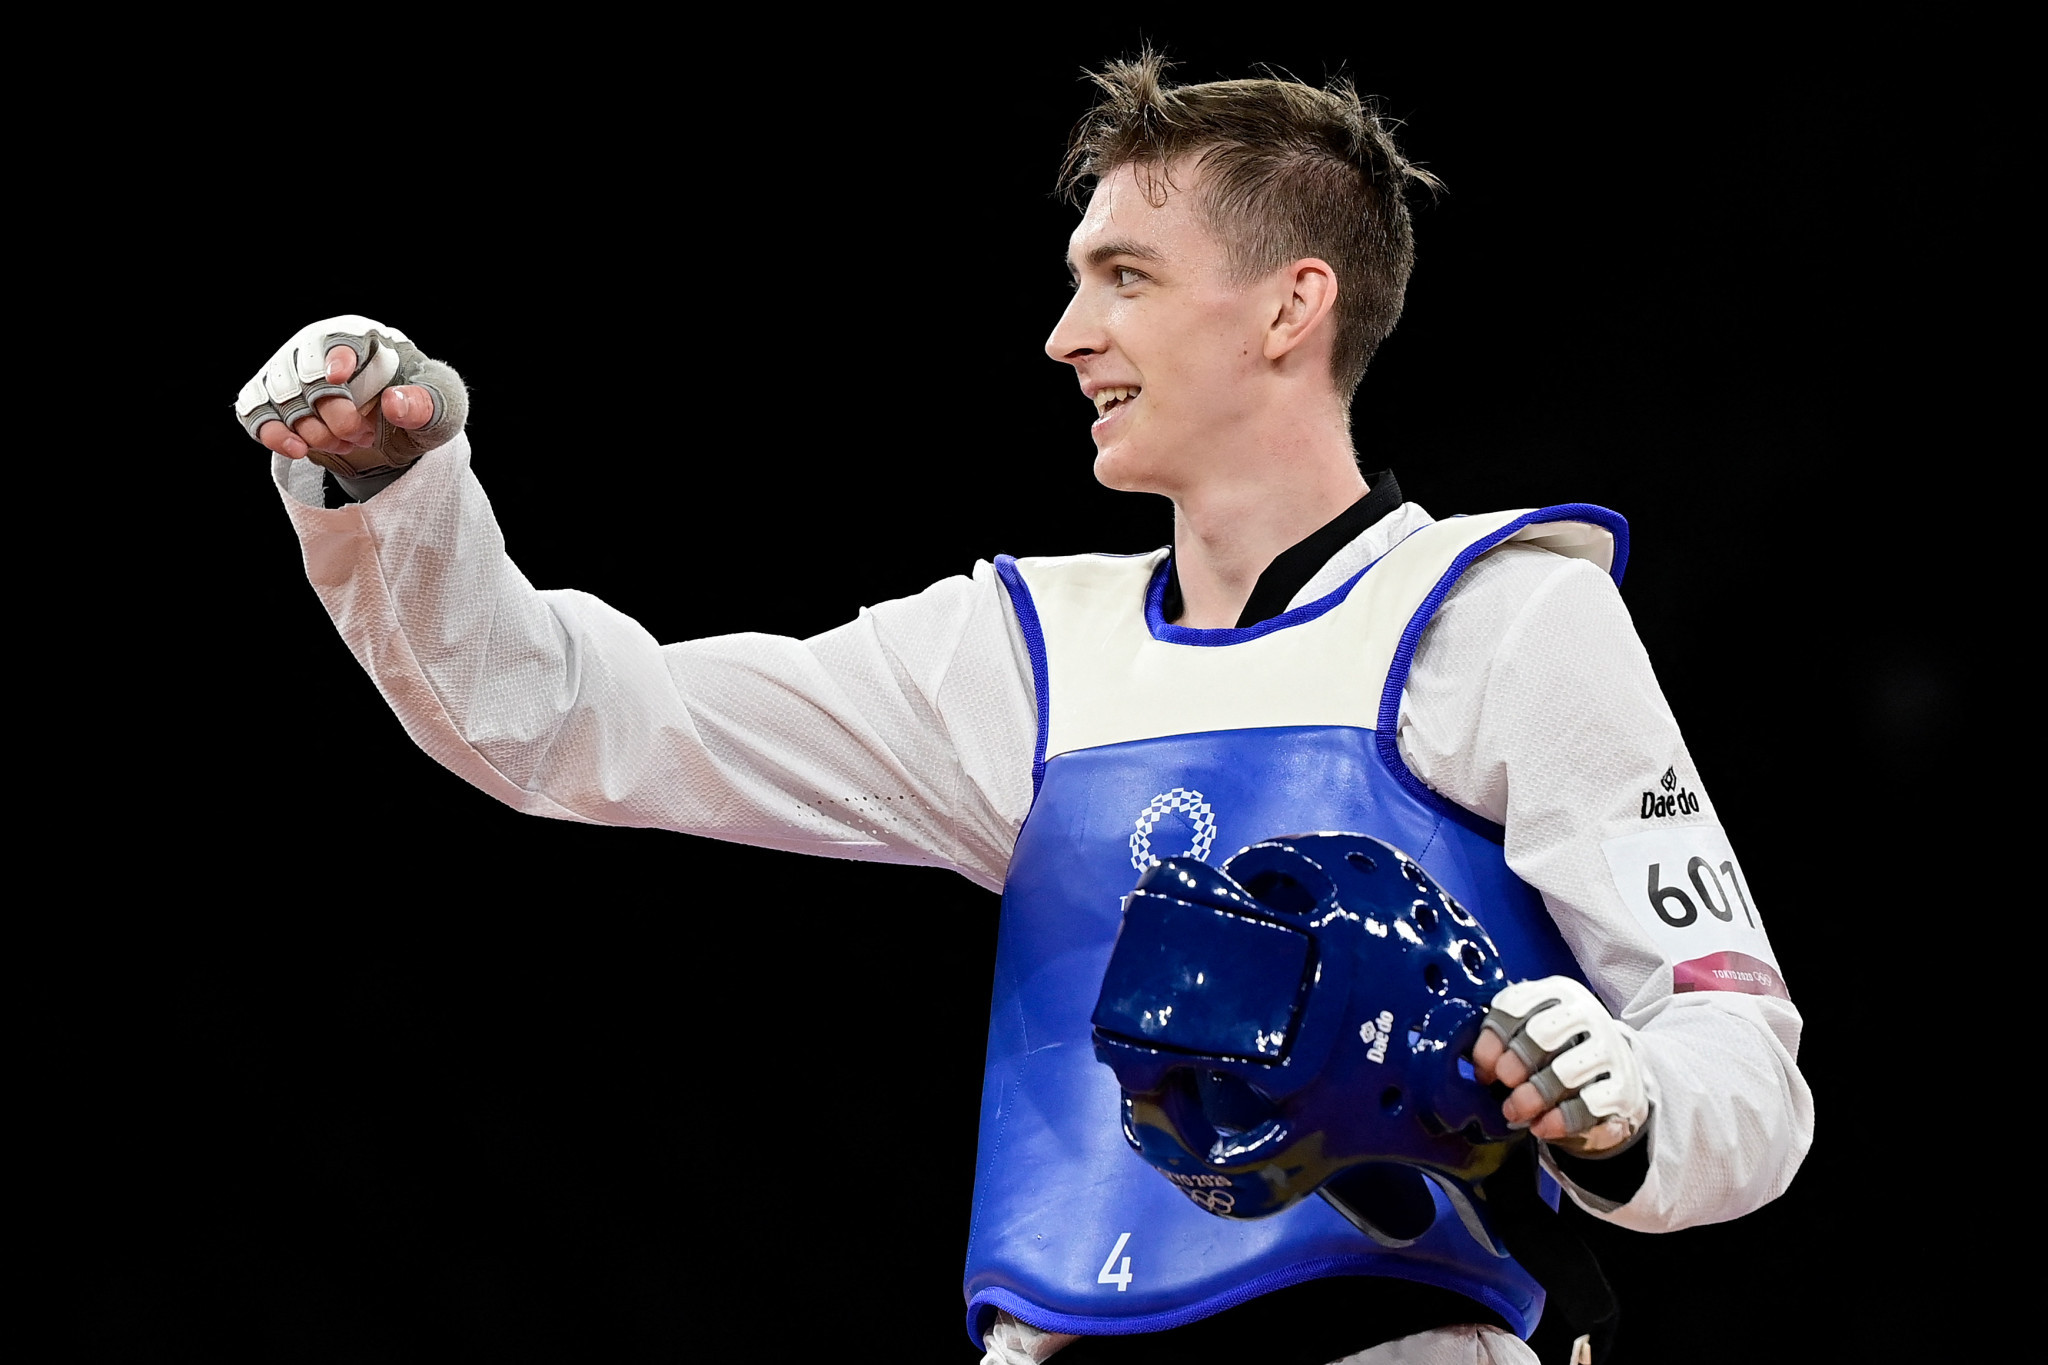 Russia's Khramtsov and Larin miss World Taekwondo Grand Prix after controversial clearance to compete